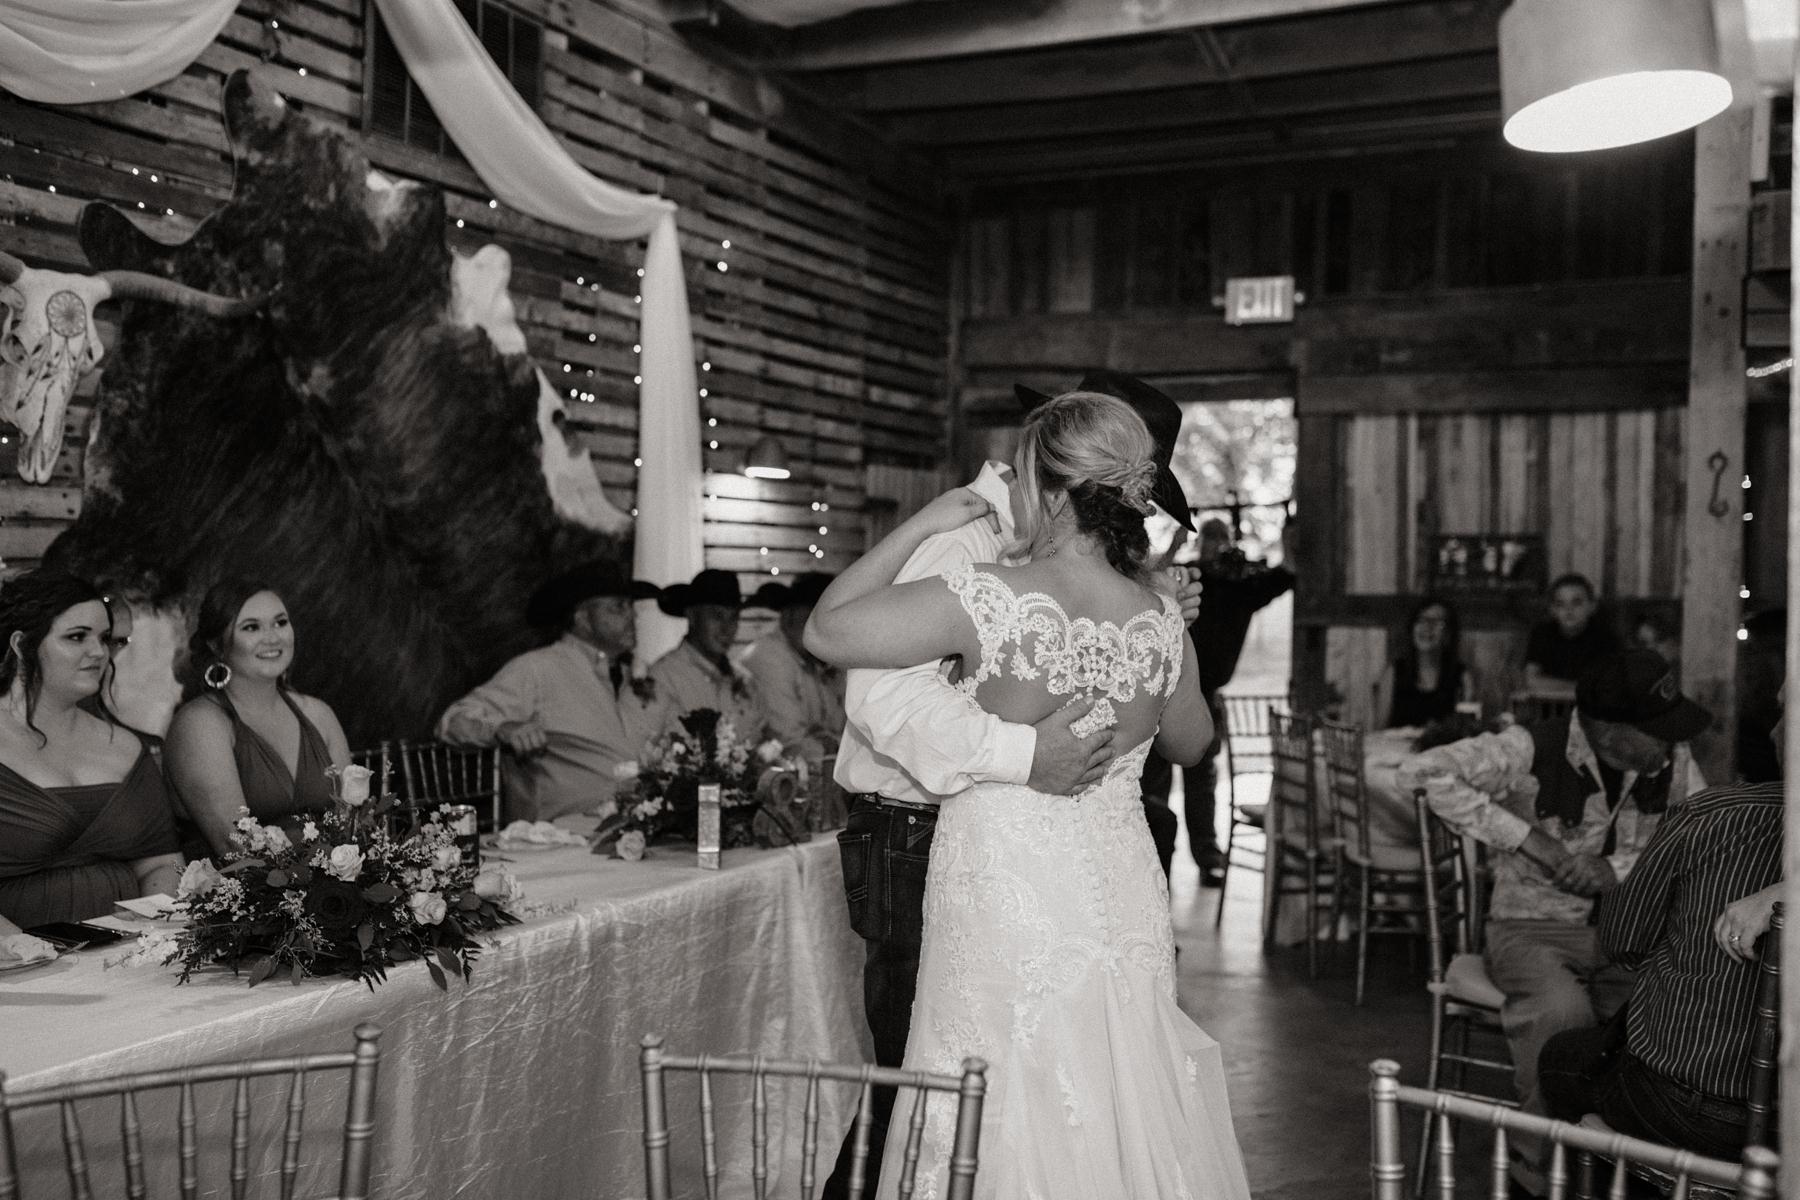 A bride and grooms first dance at their wedding at The Barn at Belamour in Springfield, MO.